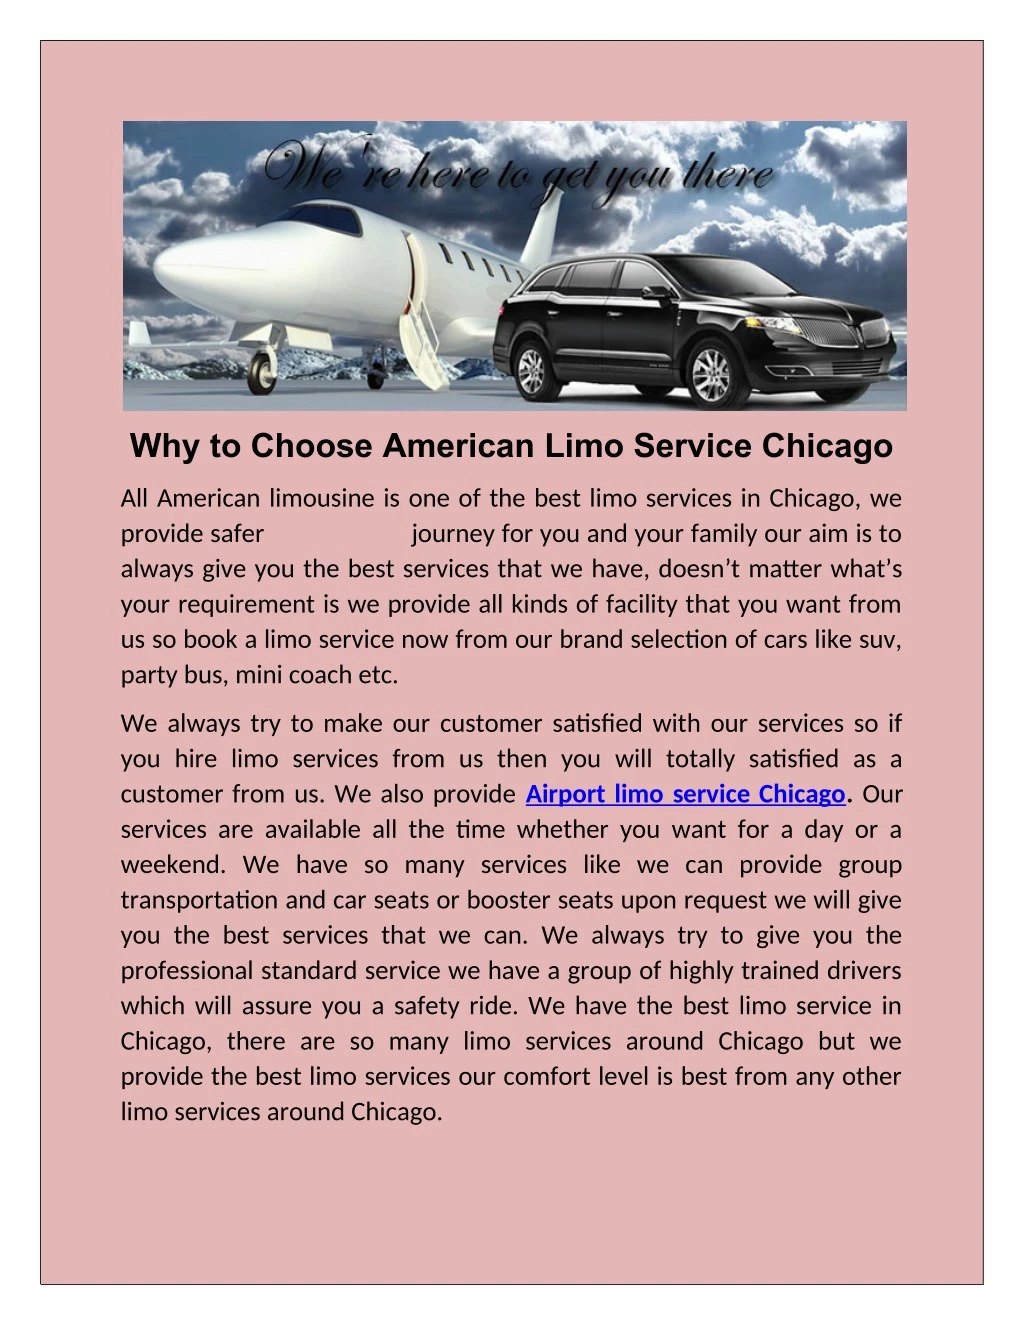 why to choose american limo service chicago